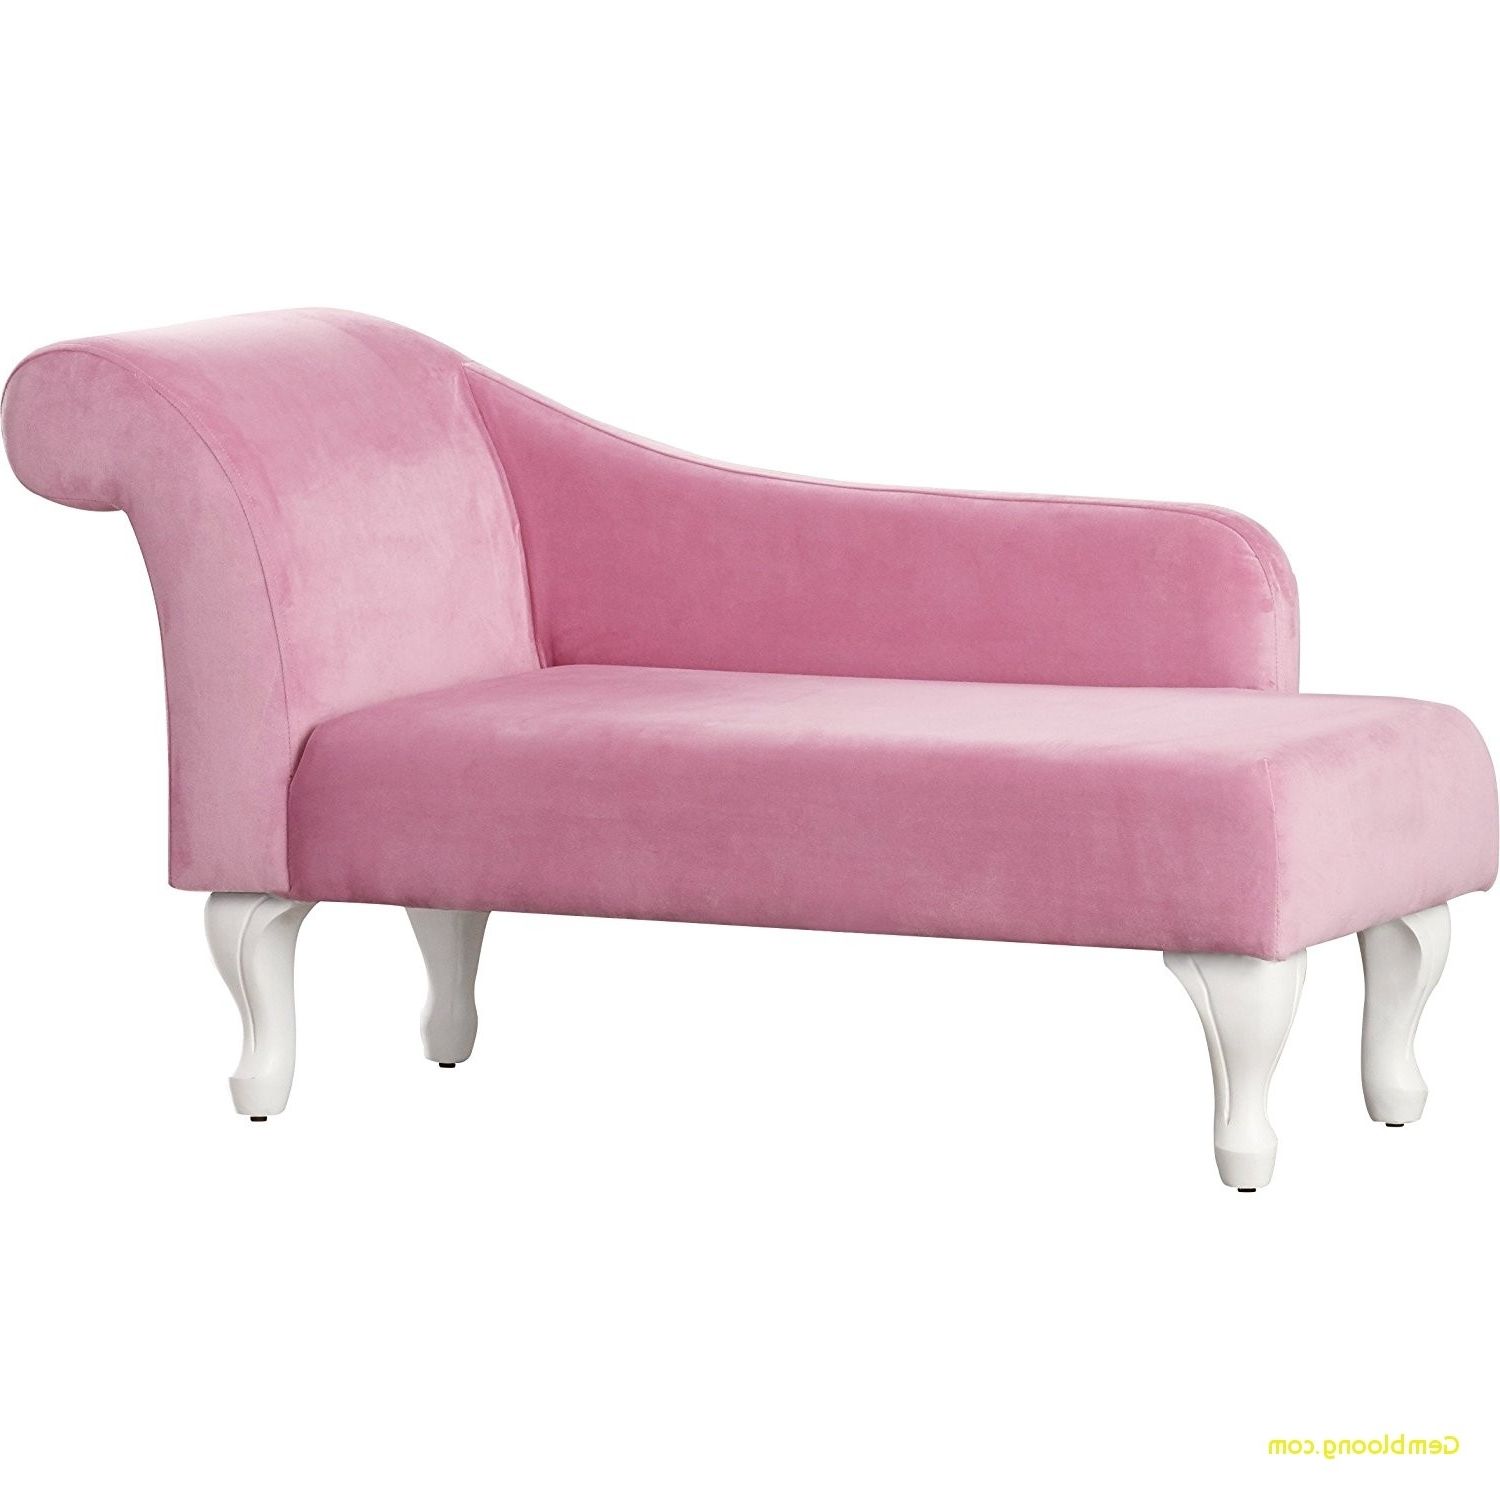 Toddler Chaise Lounge Best Of Chair Children S Little Chairs For Well Known Children's Chaise Lounges (Photo 1 of 15)